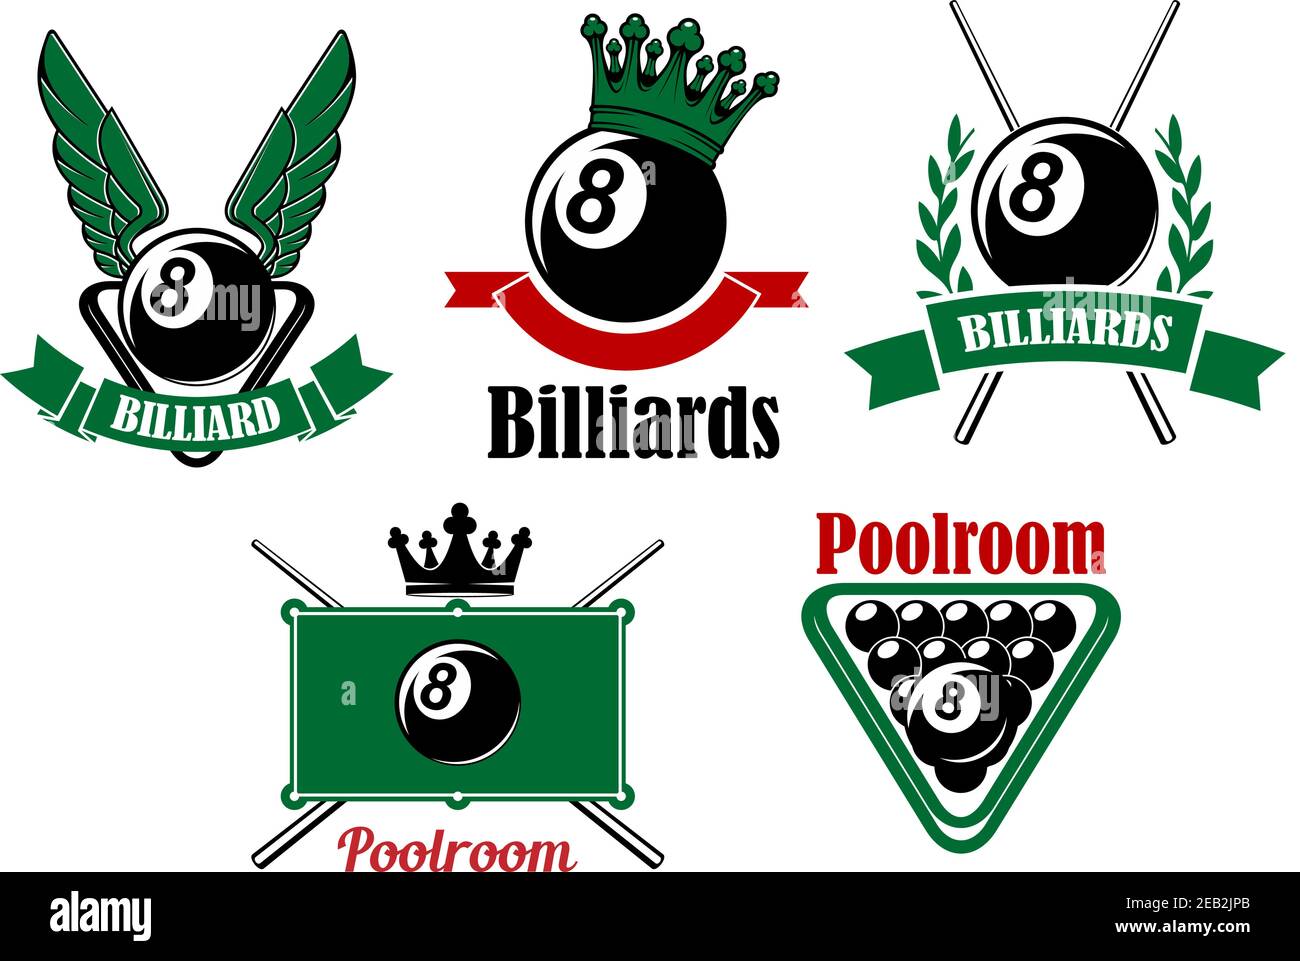 Billiard and poolroom emblems or icons set with wings, crown, crosses cues, ball and decorations Stock Vector